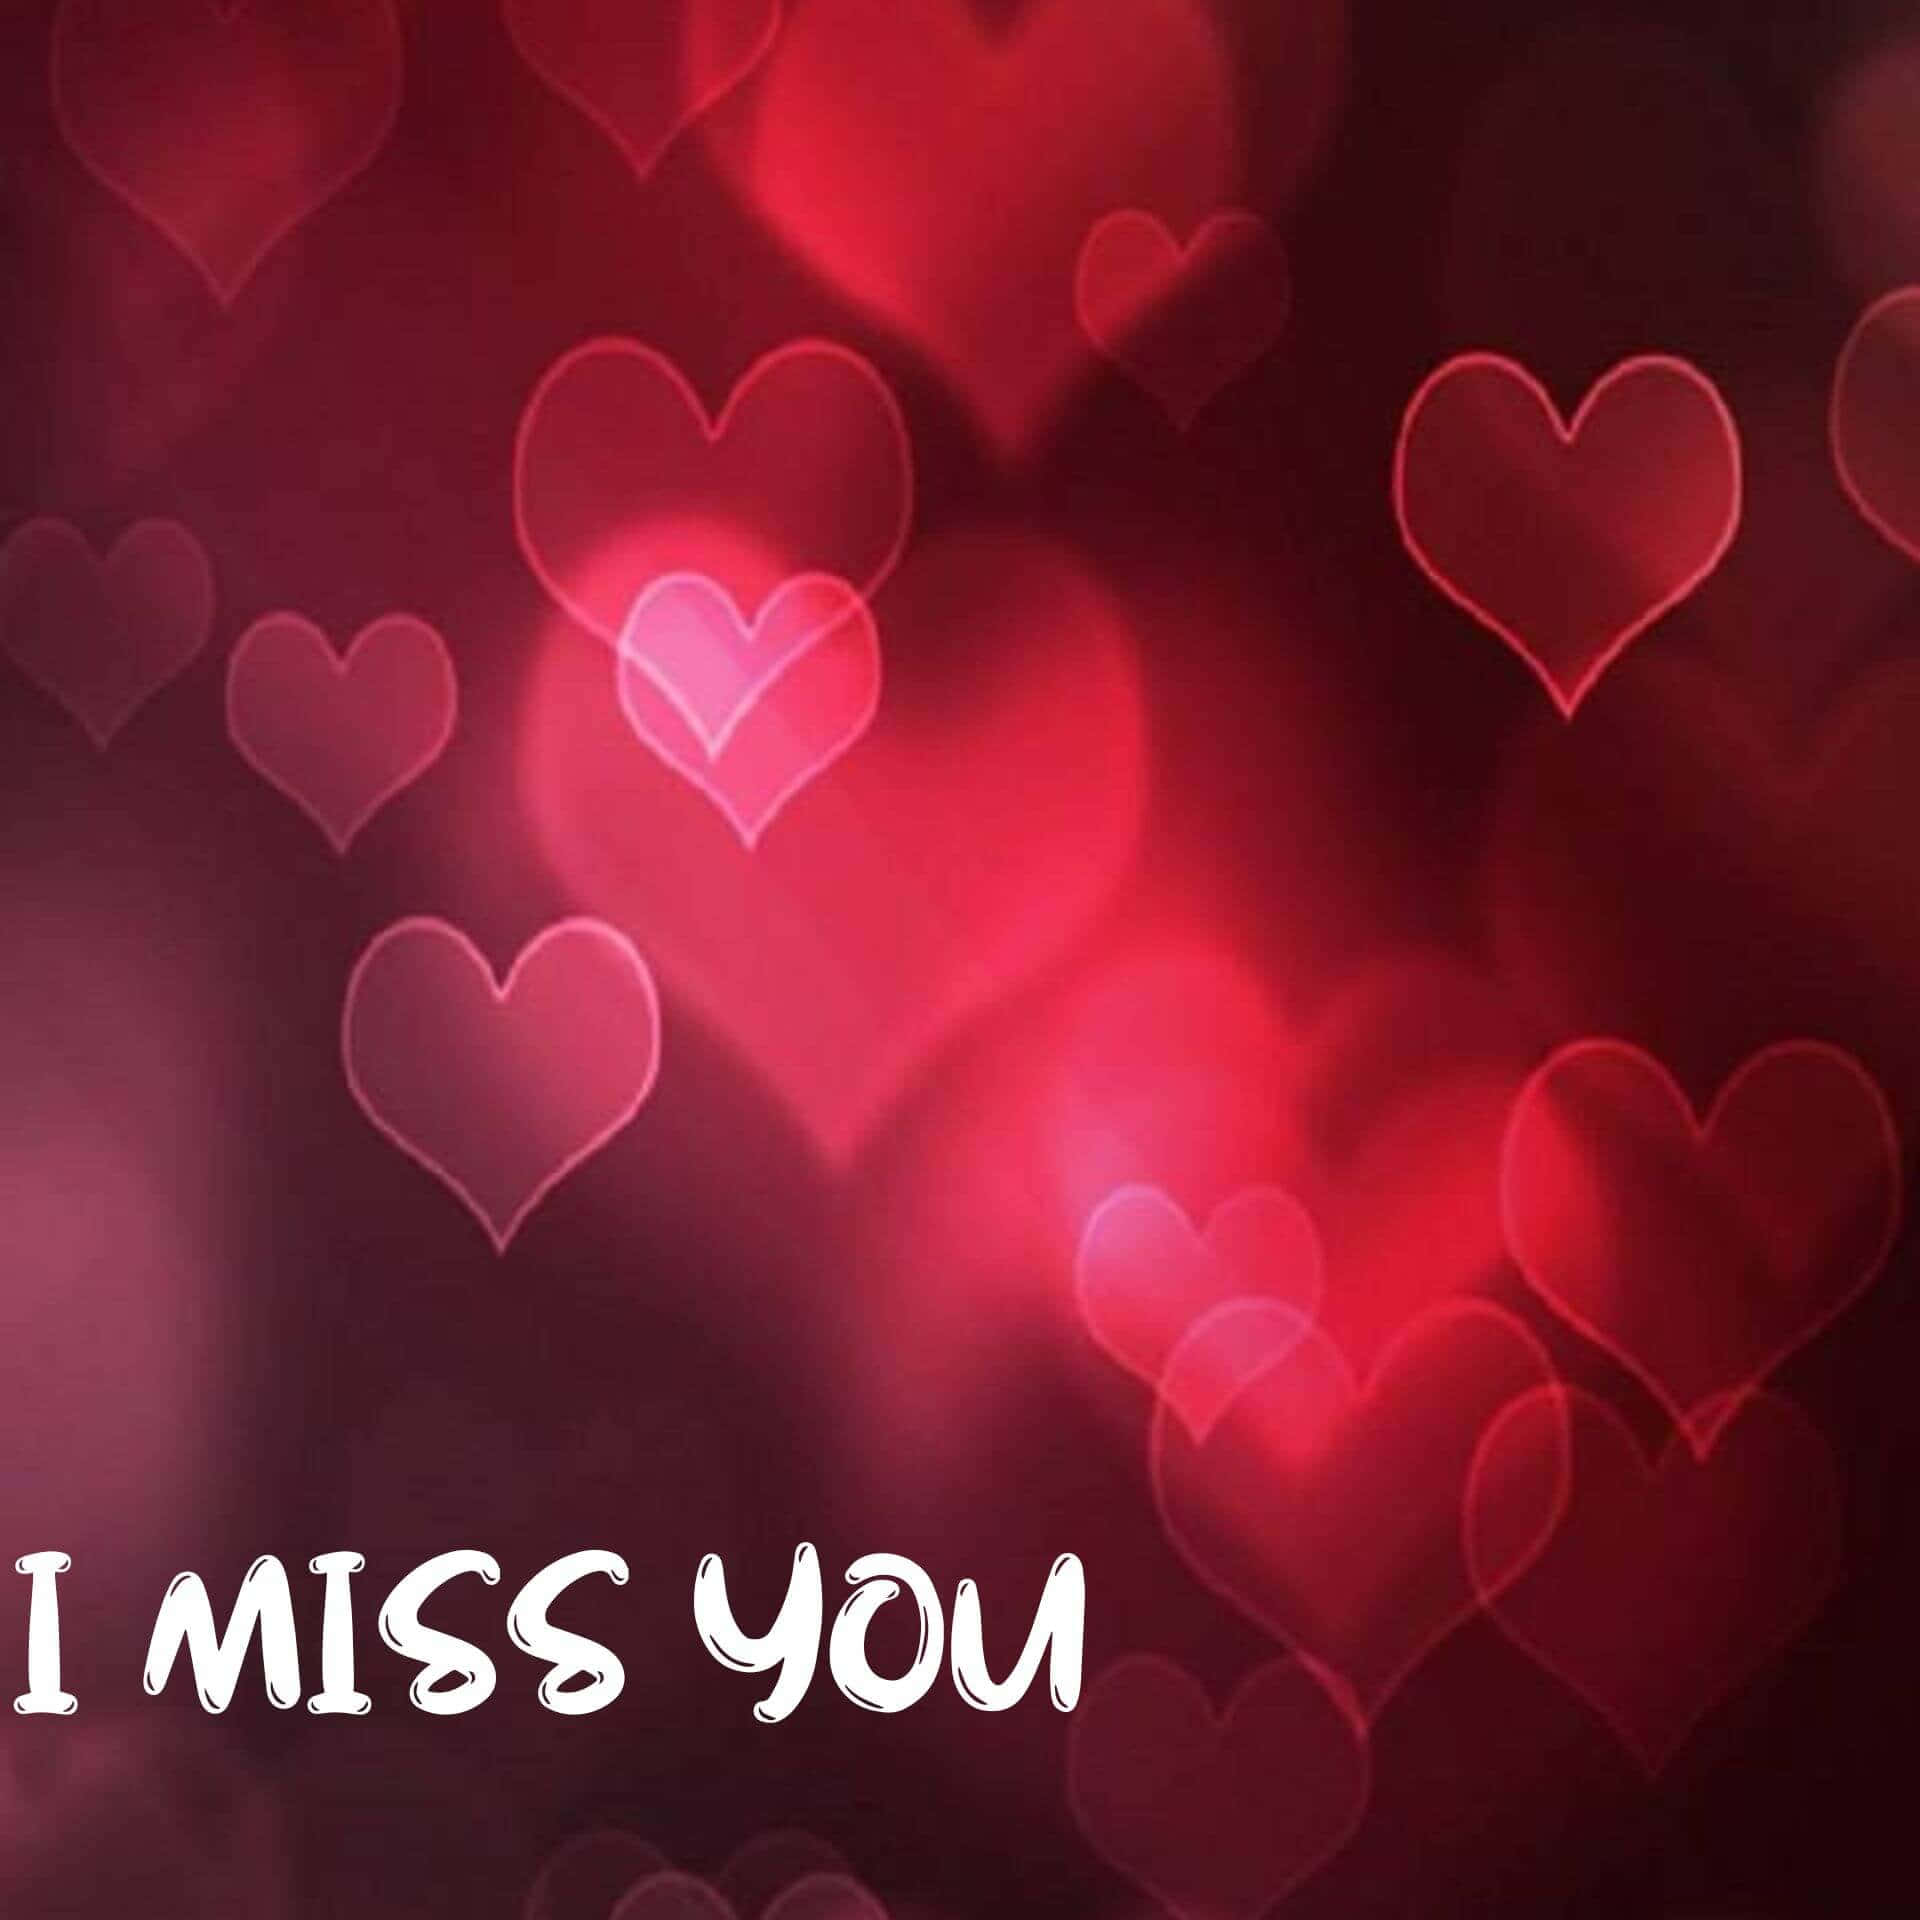 Loving Couple Embracing in 'I Miss You' Background